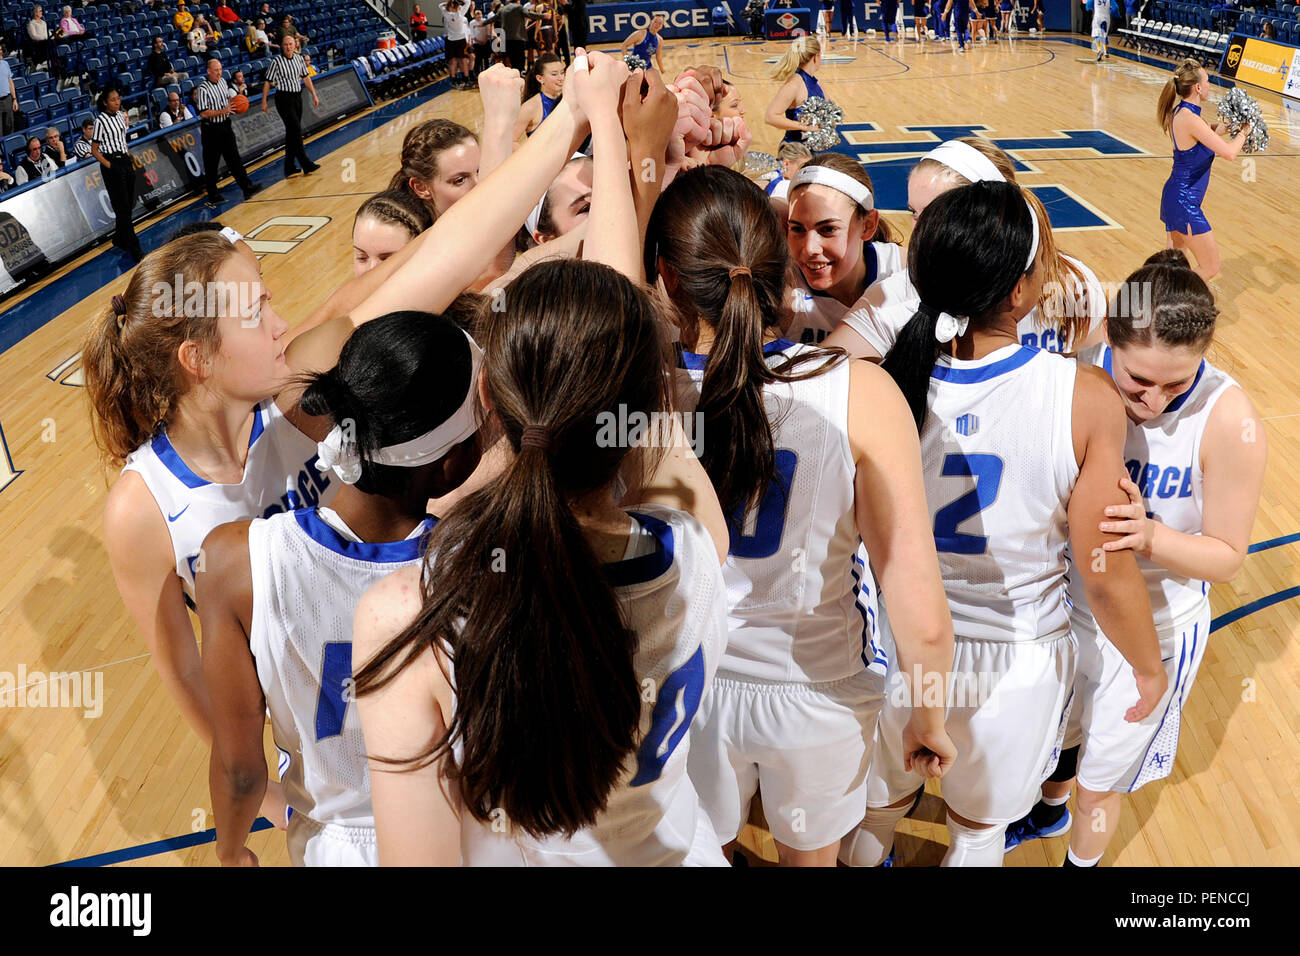 The U.S. Air Force Academy women's basketball team huddles up before tipoff against The Cowgirls of Wyoming at Clune Arena in Colorado Springs, Colo., Jan. 7, 2016. The Falcons started off strong, but fell to Wyoming 67-45 in this Mountain West Conference contest.  (Air Force photo/Jason Gutierrez/released) Stock Photo